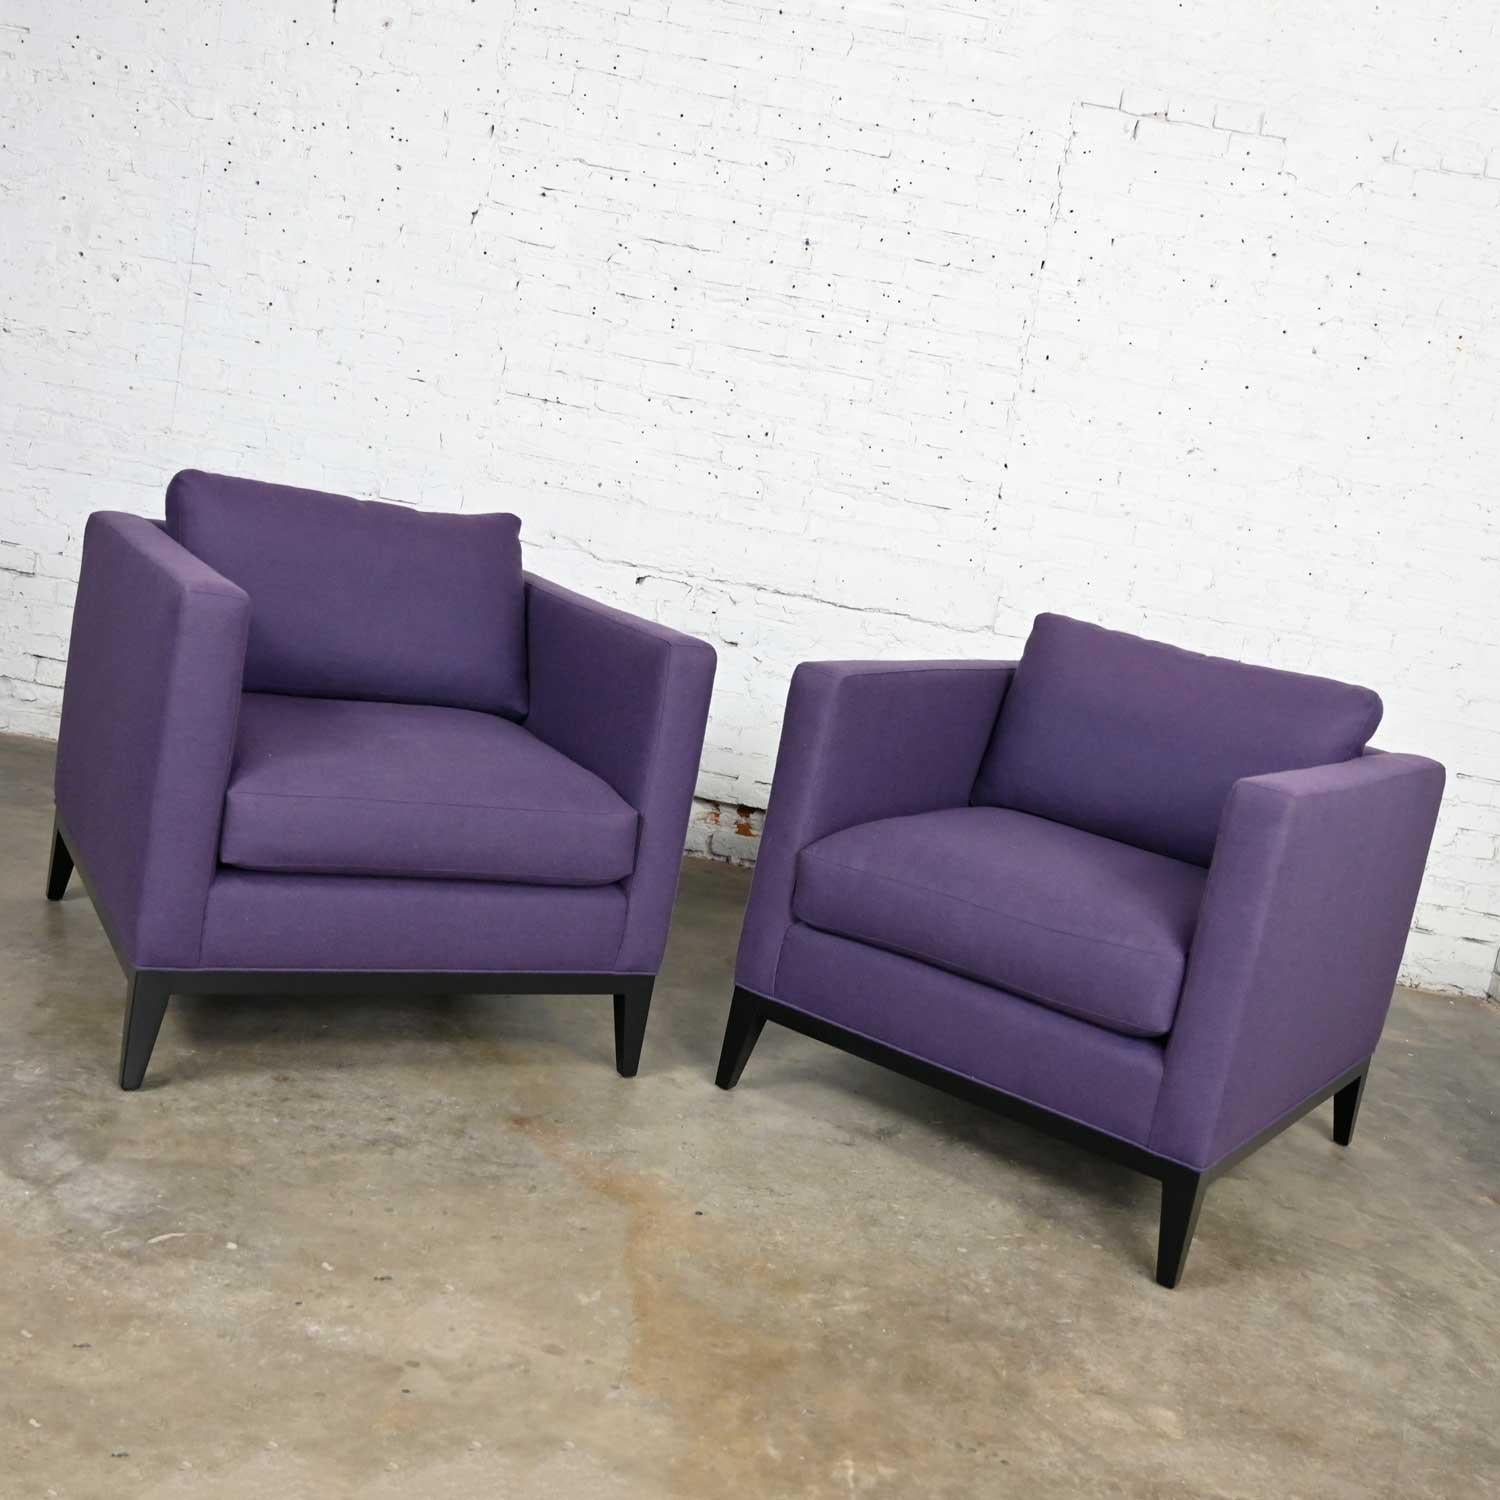 Modern Purple Plum Tone Tuxedo Style Club Chairs by Baker a Pair For Sale 4